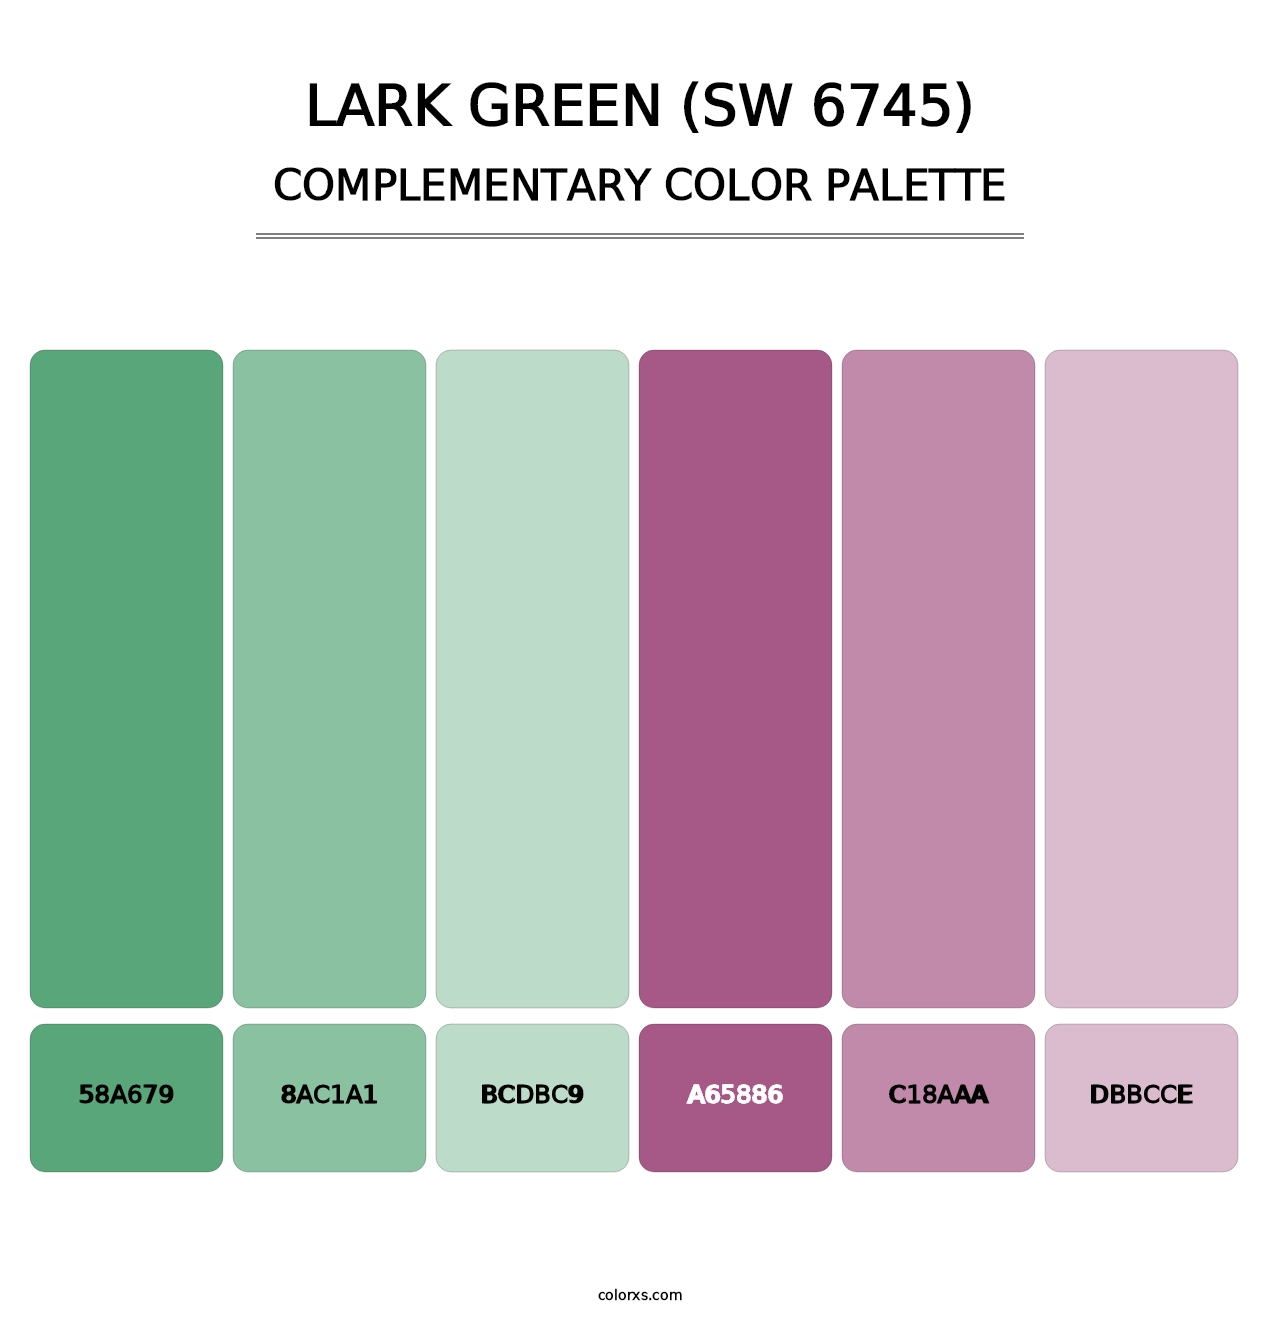 Lark Green (SW 6745) - Complementary Color Palette